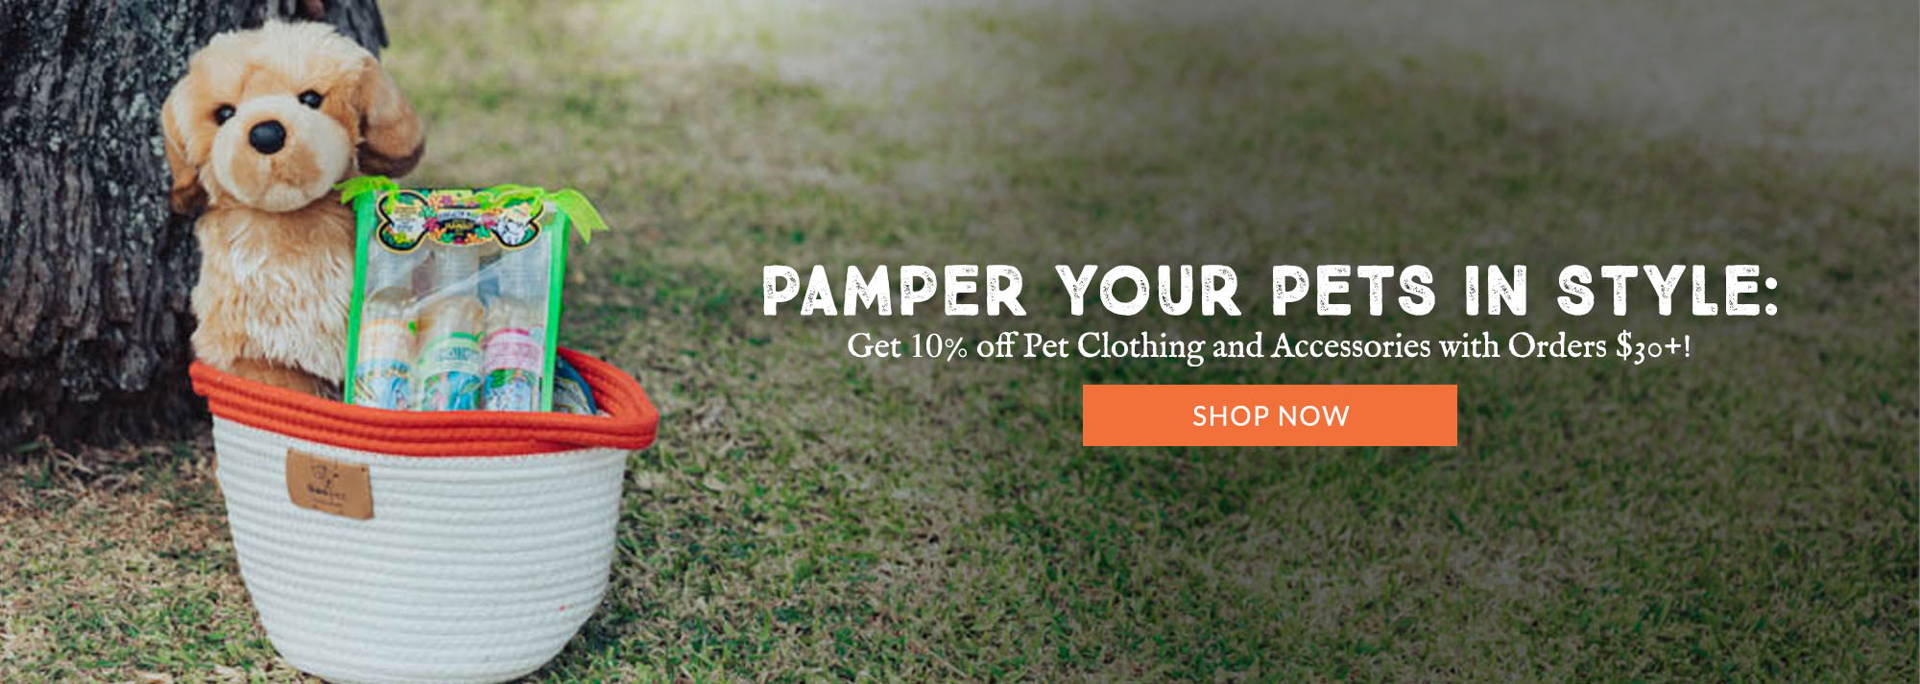 Pamper Your Pets in Style: Get 10% off Pet Clothing and Accessories with Orders $30+!